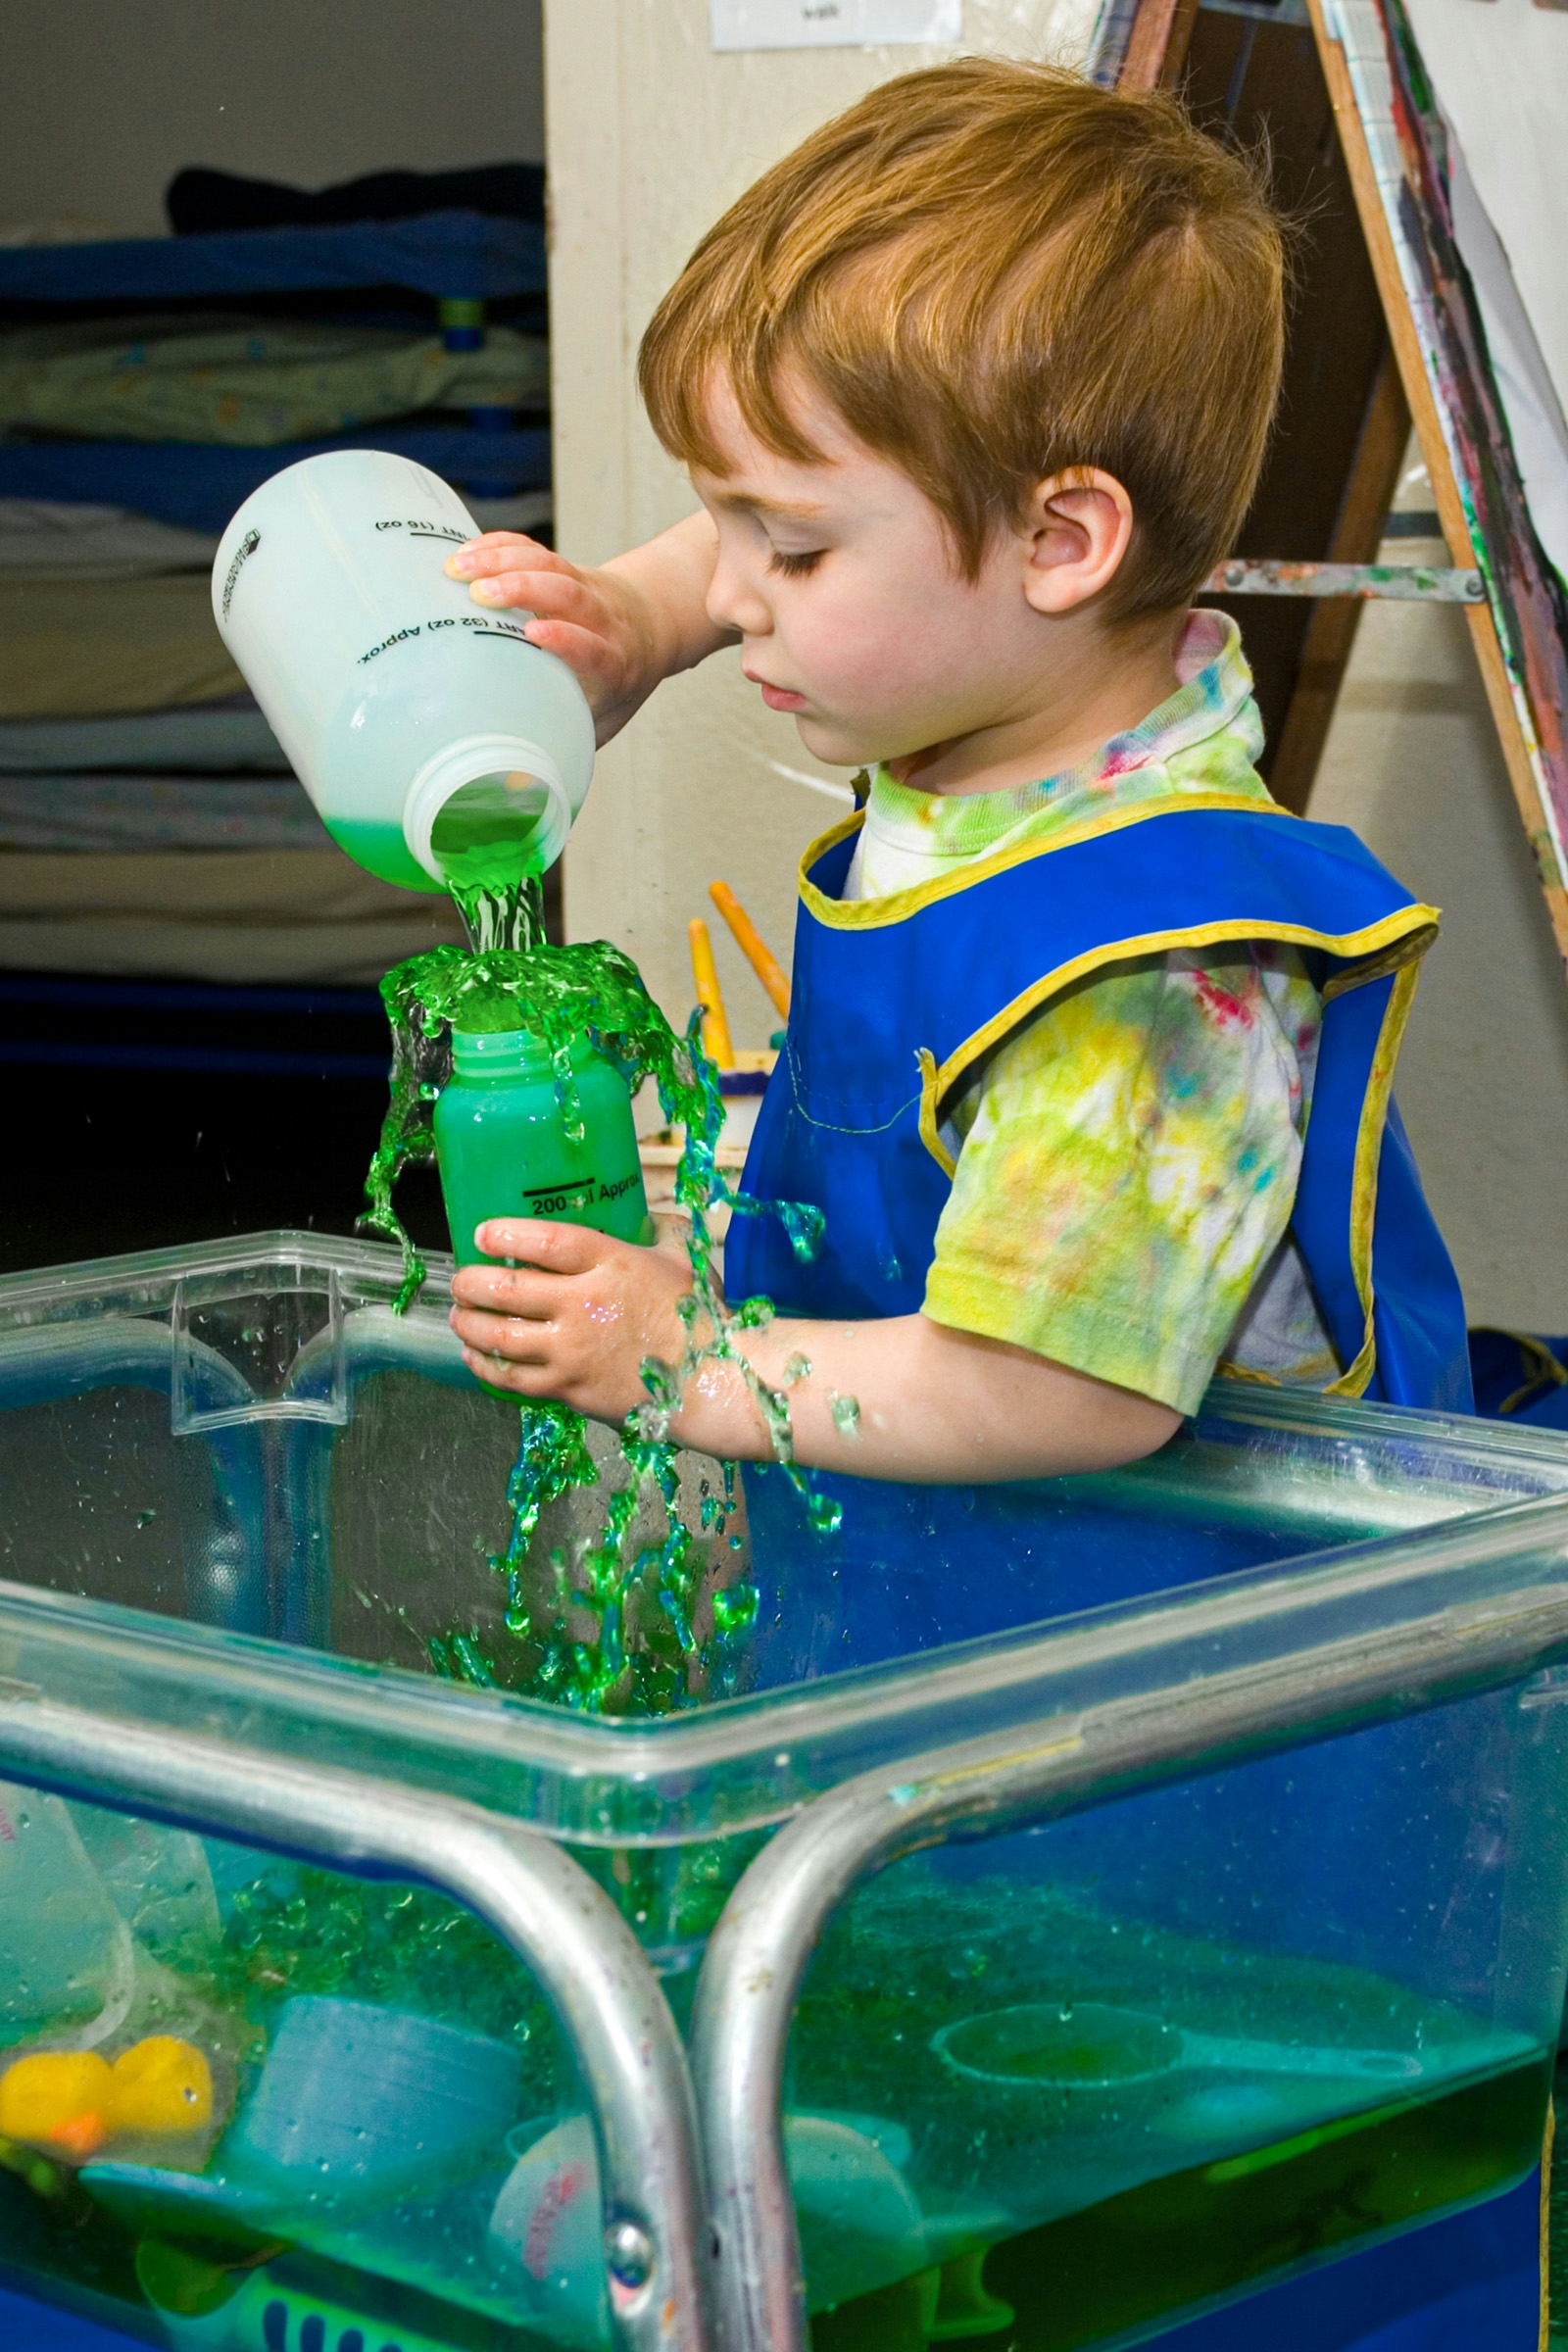 Boy (3) splashes colored water while playing at water table